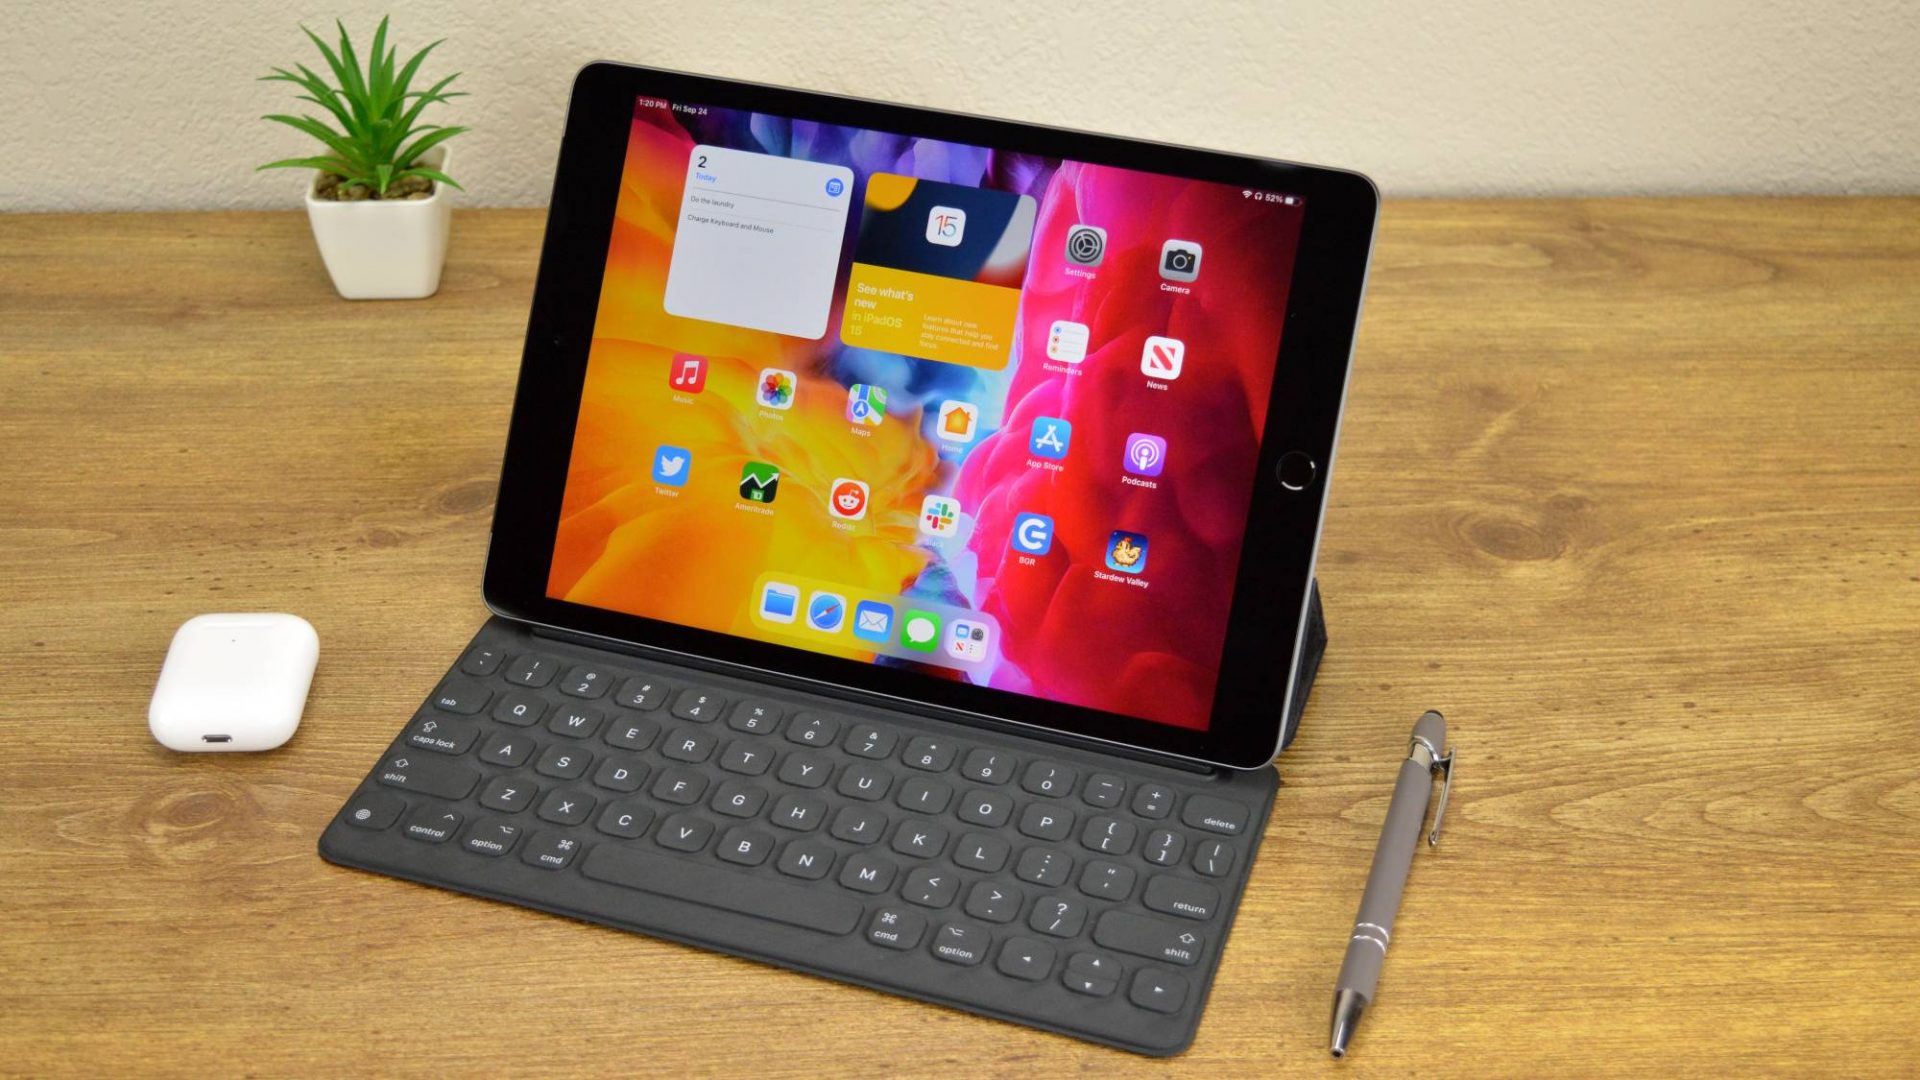 Apple iPad (2021) overview: Quiet a enormous tablet, however exhibiting its age